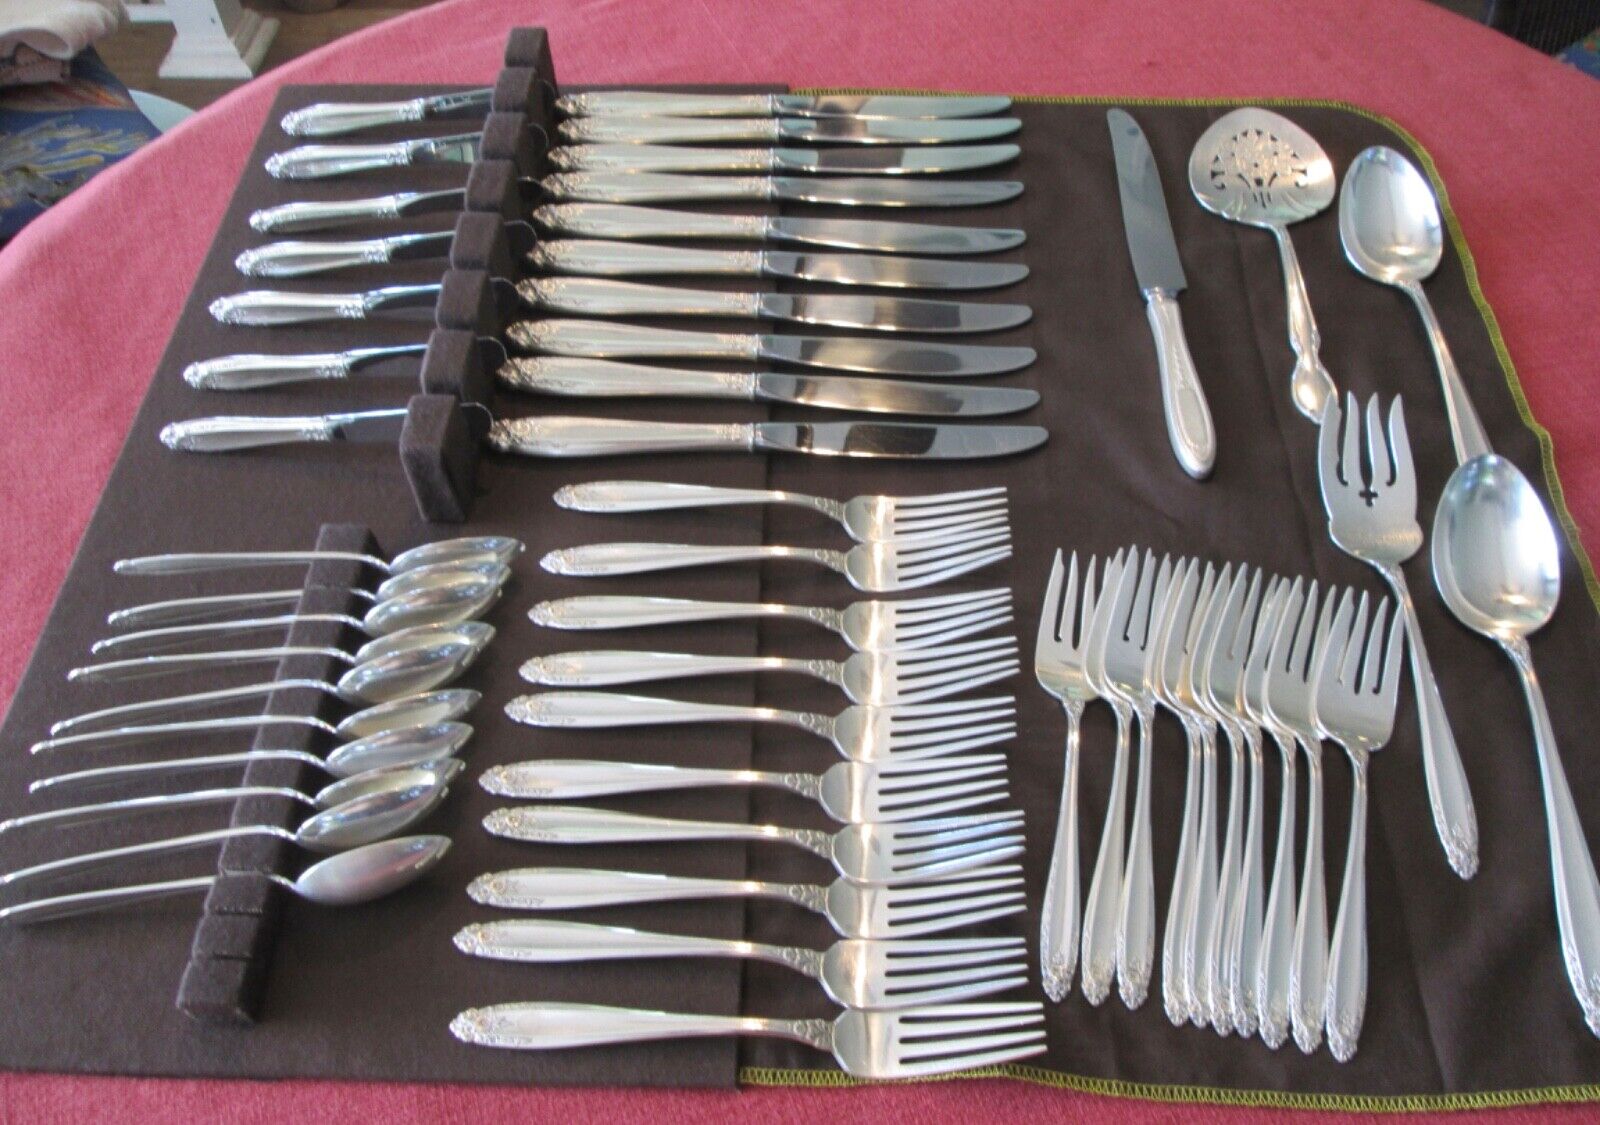 Prelude by International Sterling Silver Flatware set of 52 pieces with monogram